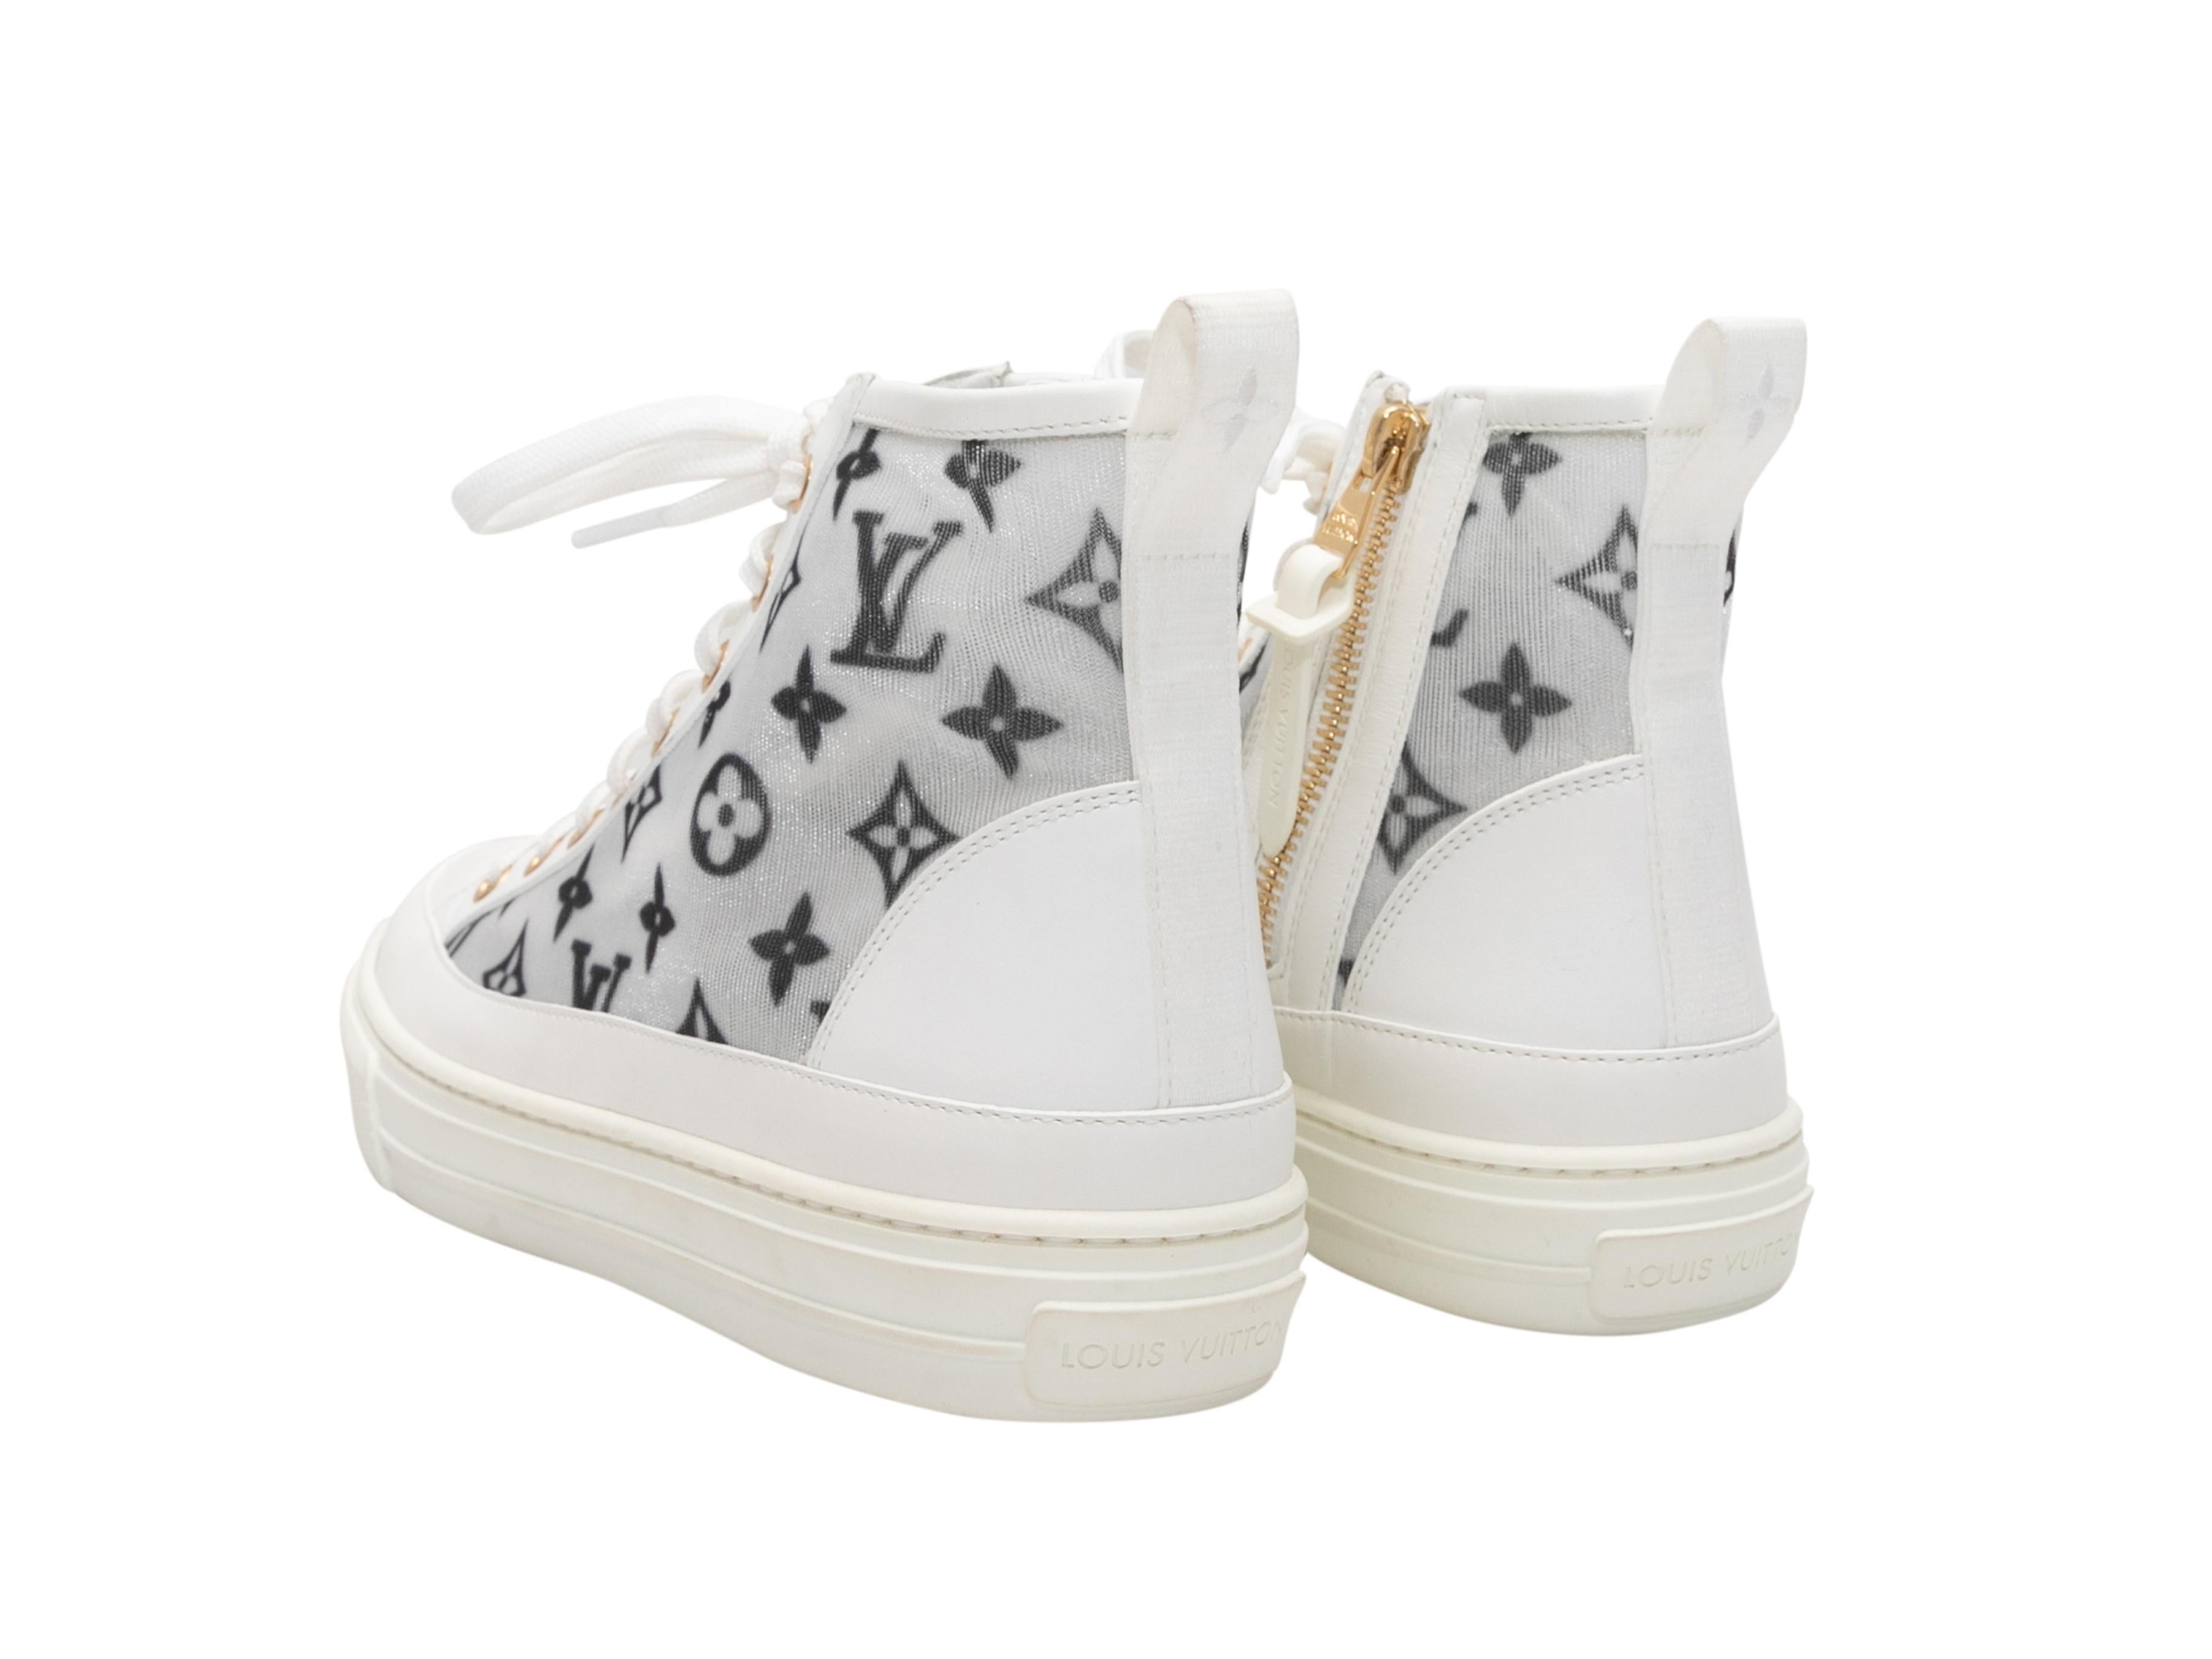 White & Black Louis Vuitton Monogram High-Top Sneakers Size 38 For Sale 1